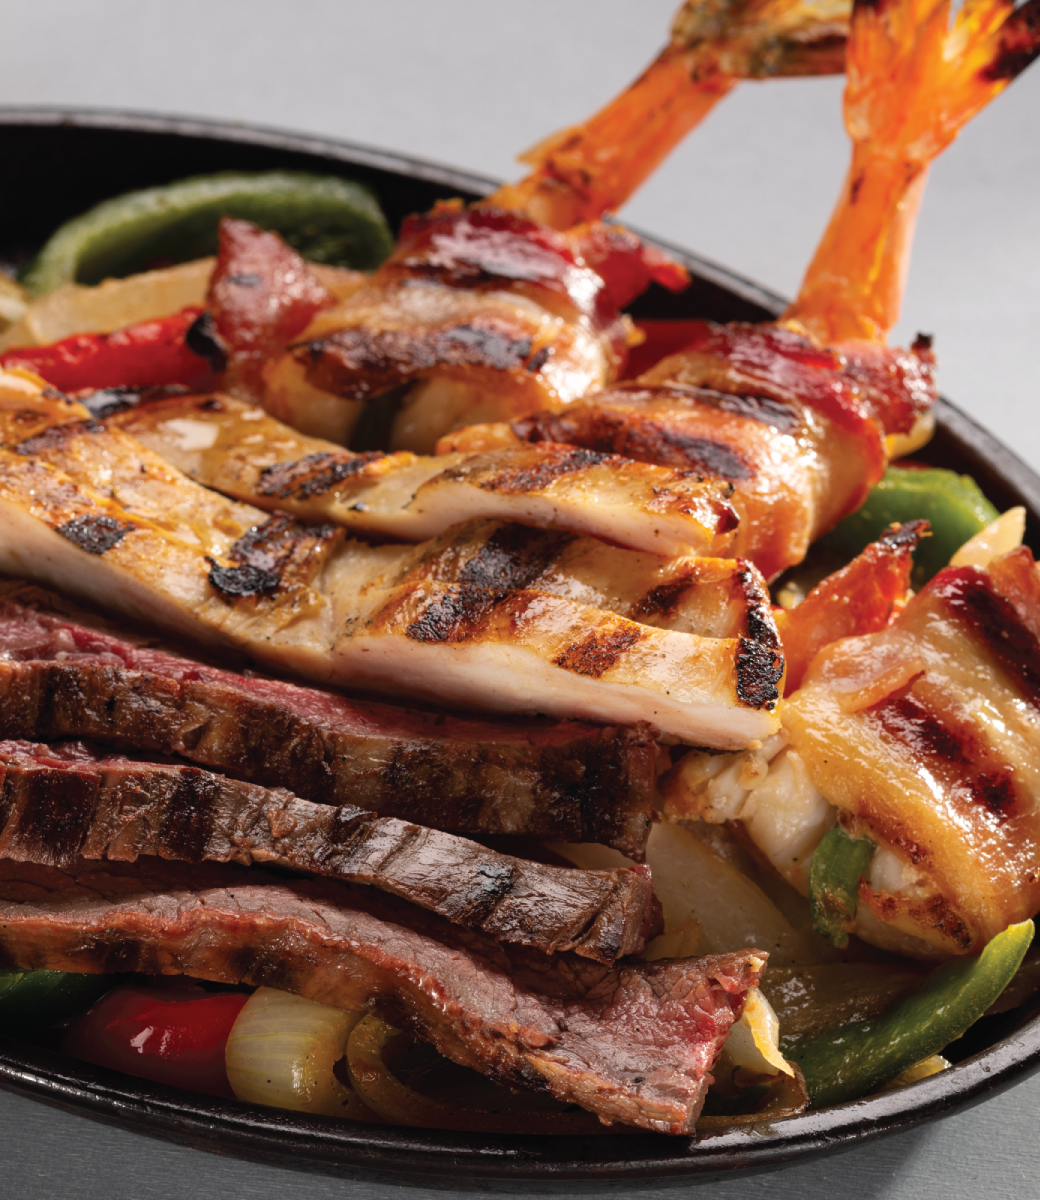 Chicken and steak fajitas on top of a bed of grilled onions and bell peppers